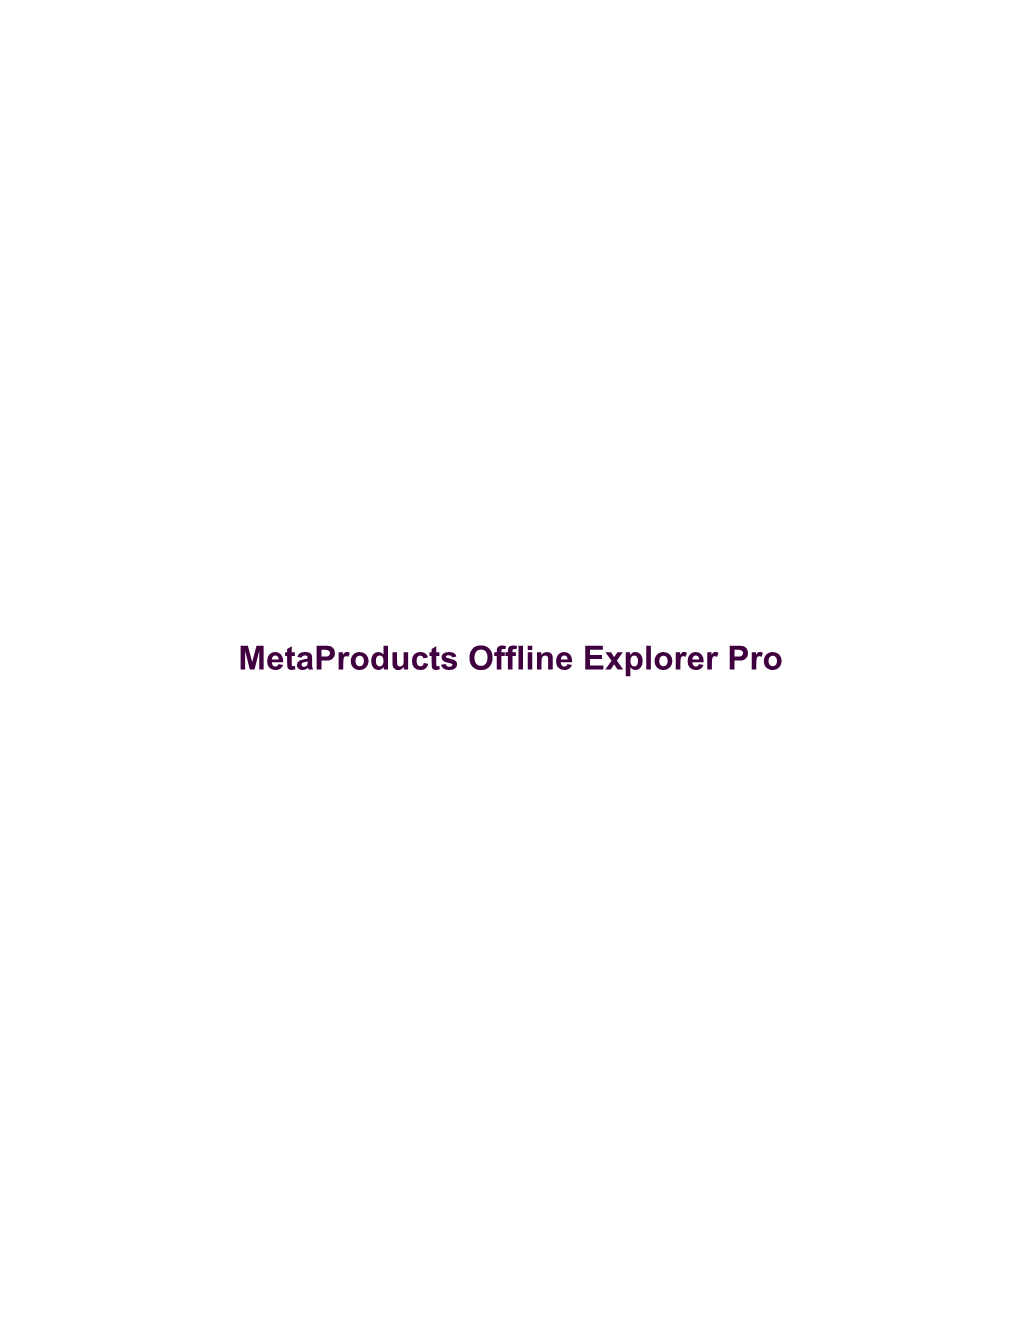 Metaproducts Offline Explorer Pro Metaproducts Offline Explorer Pro